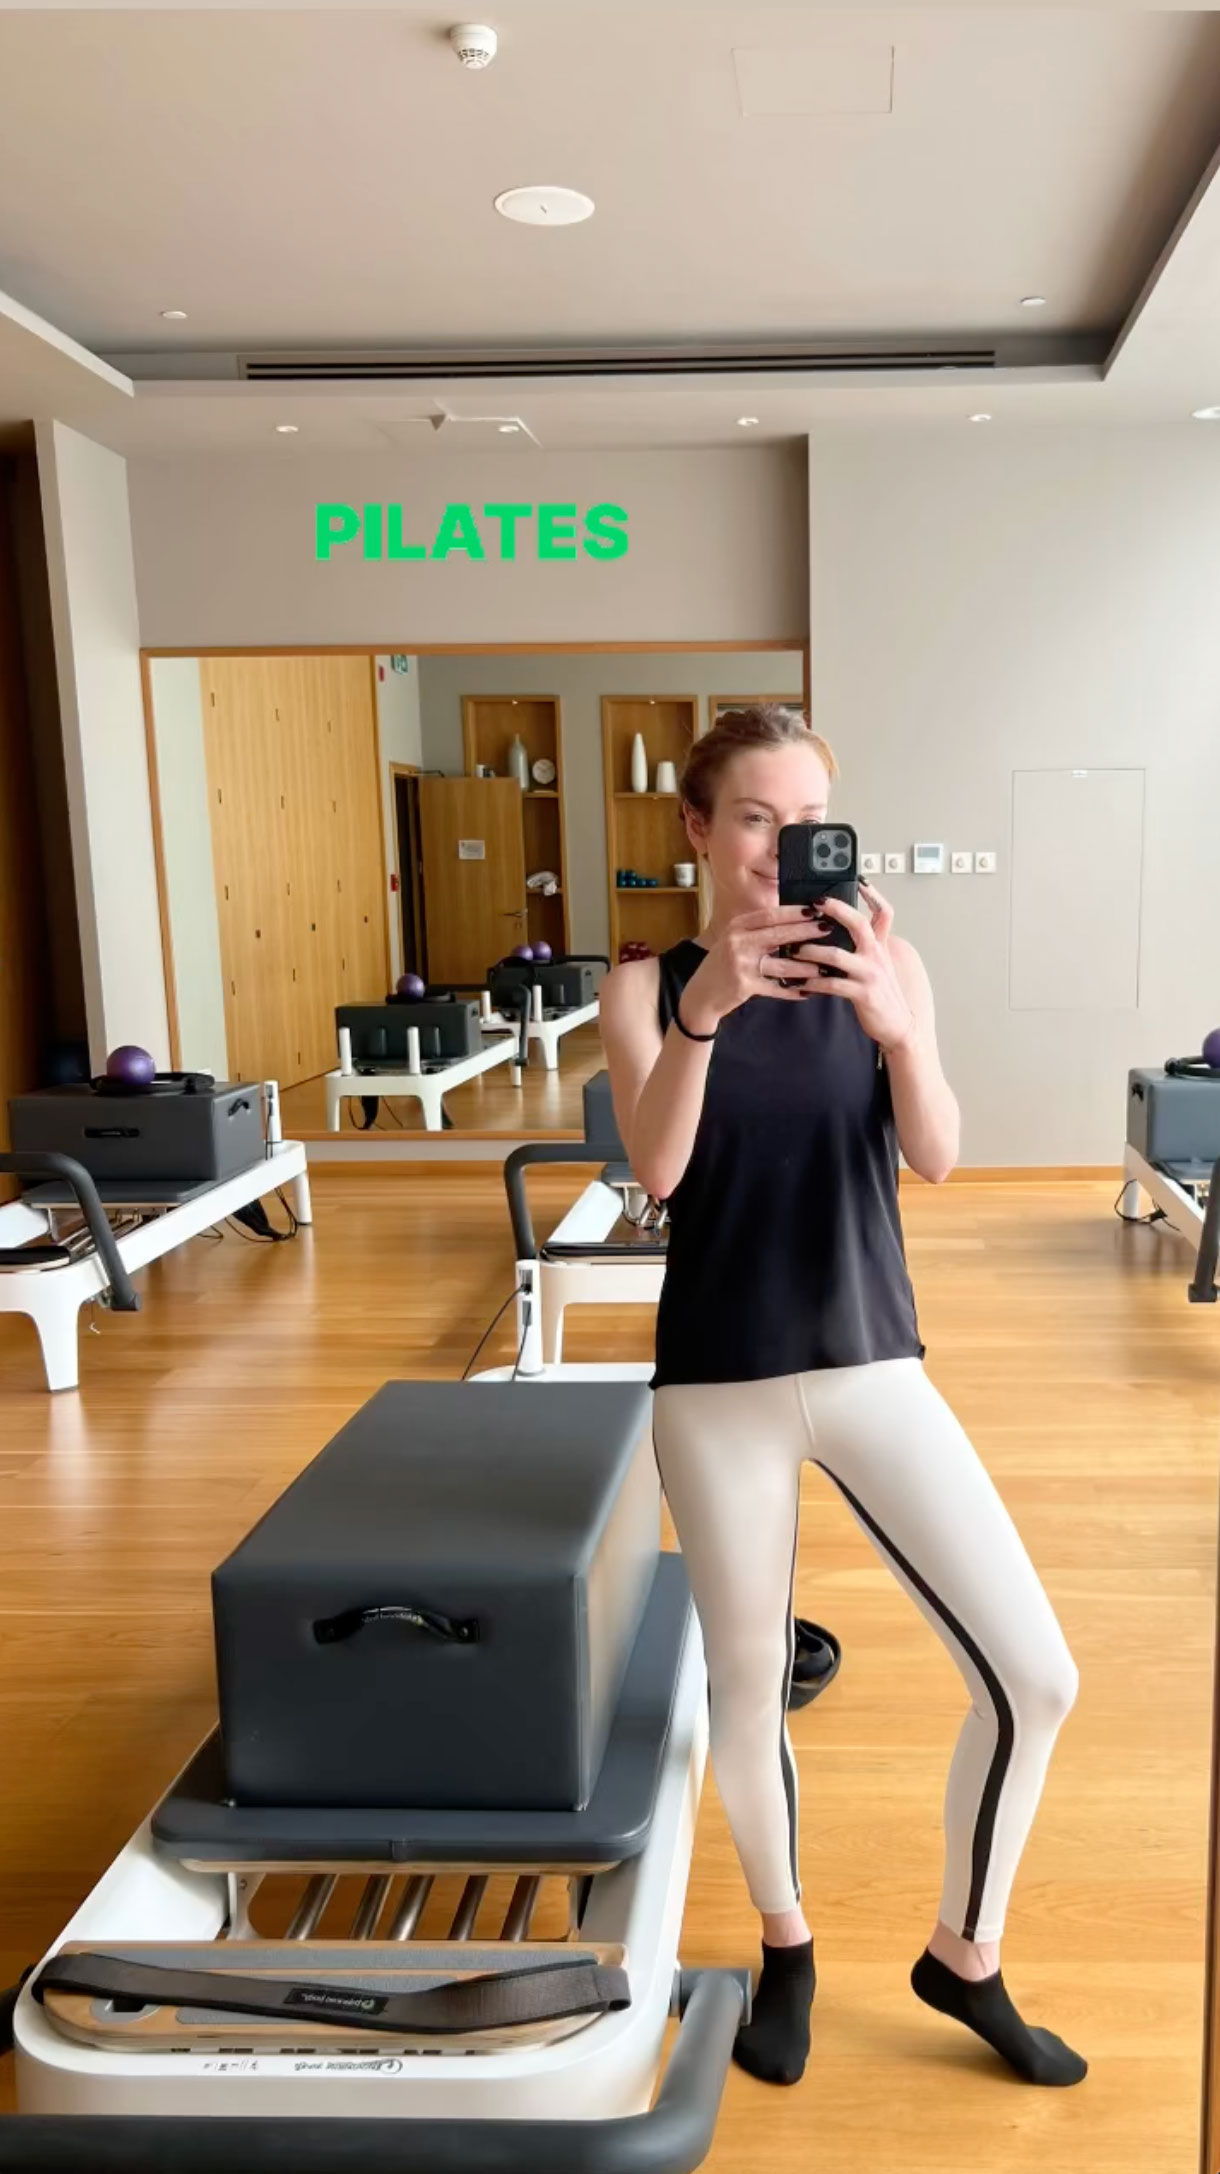 Prior to the Mean Girls movie premiere, Lindsay resurfaced in a Pilates studio